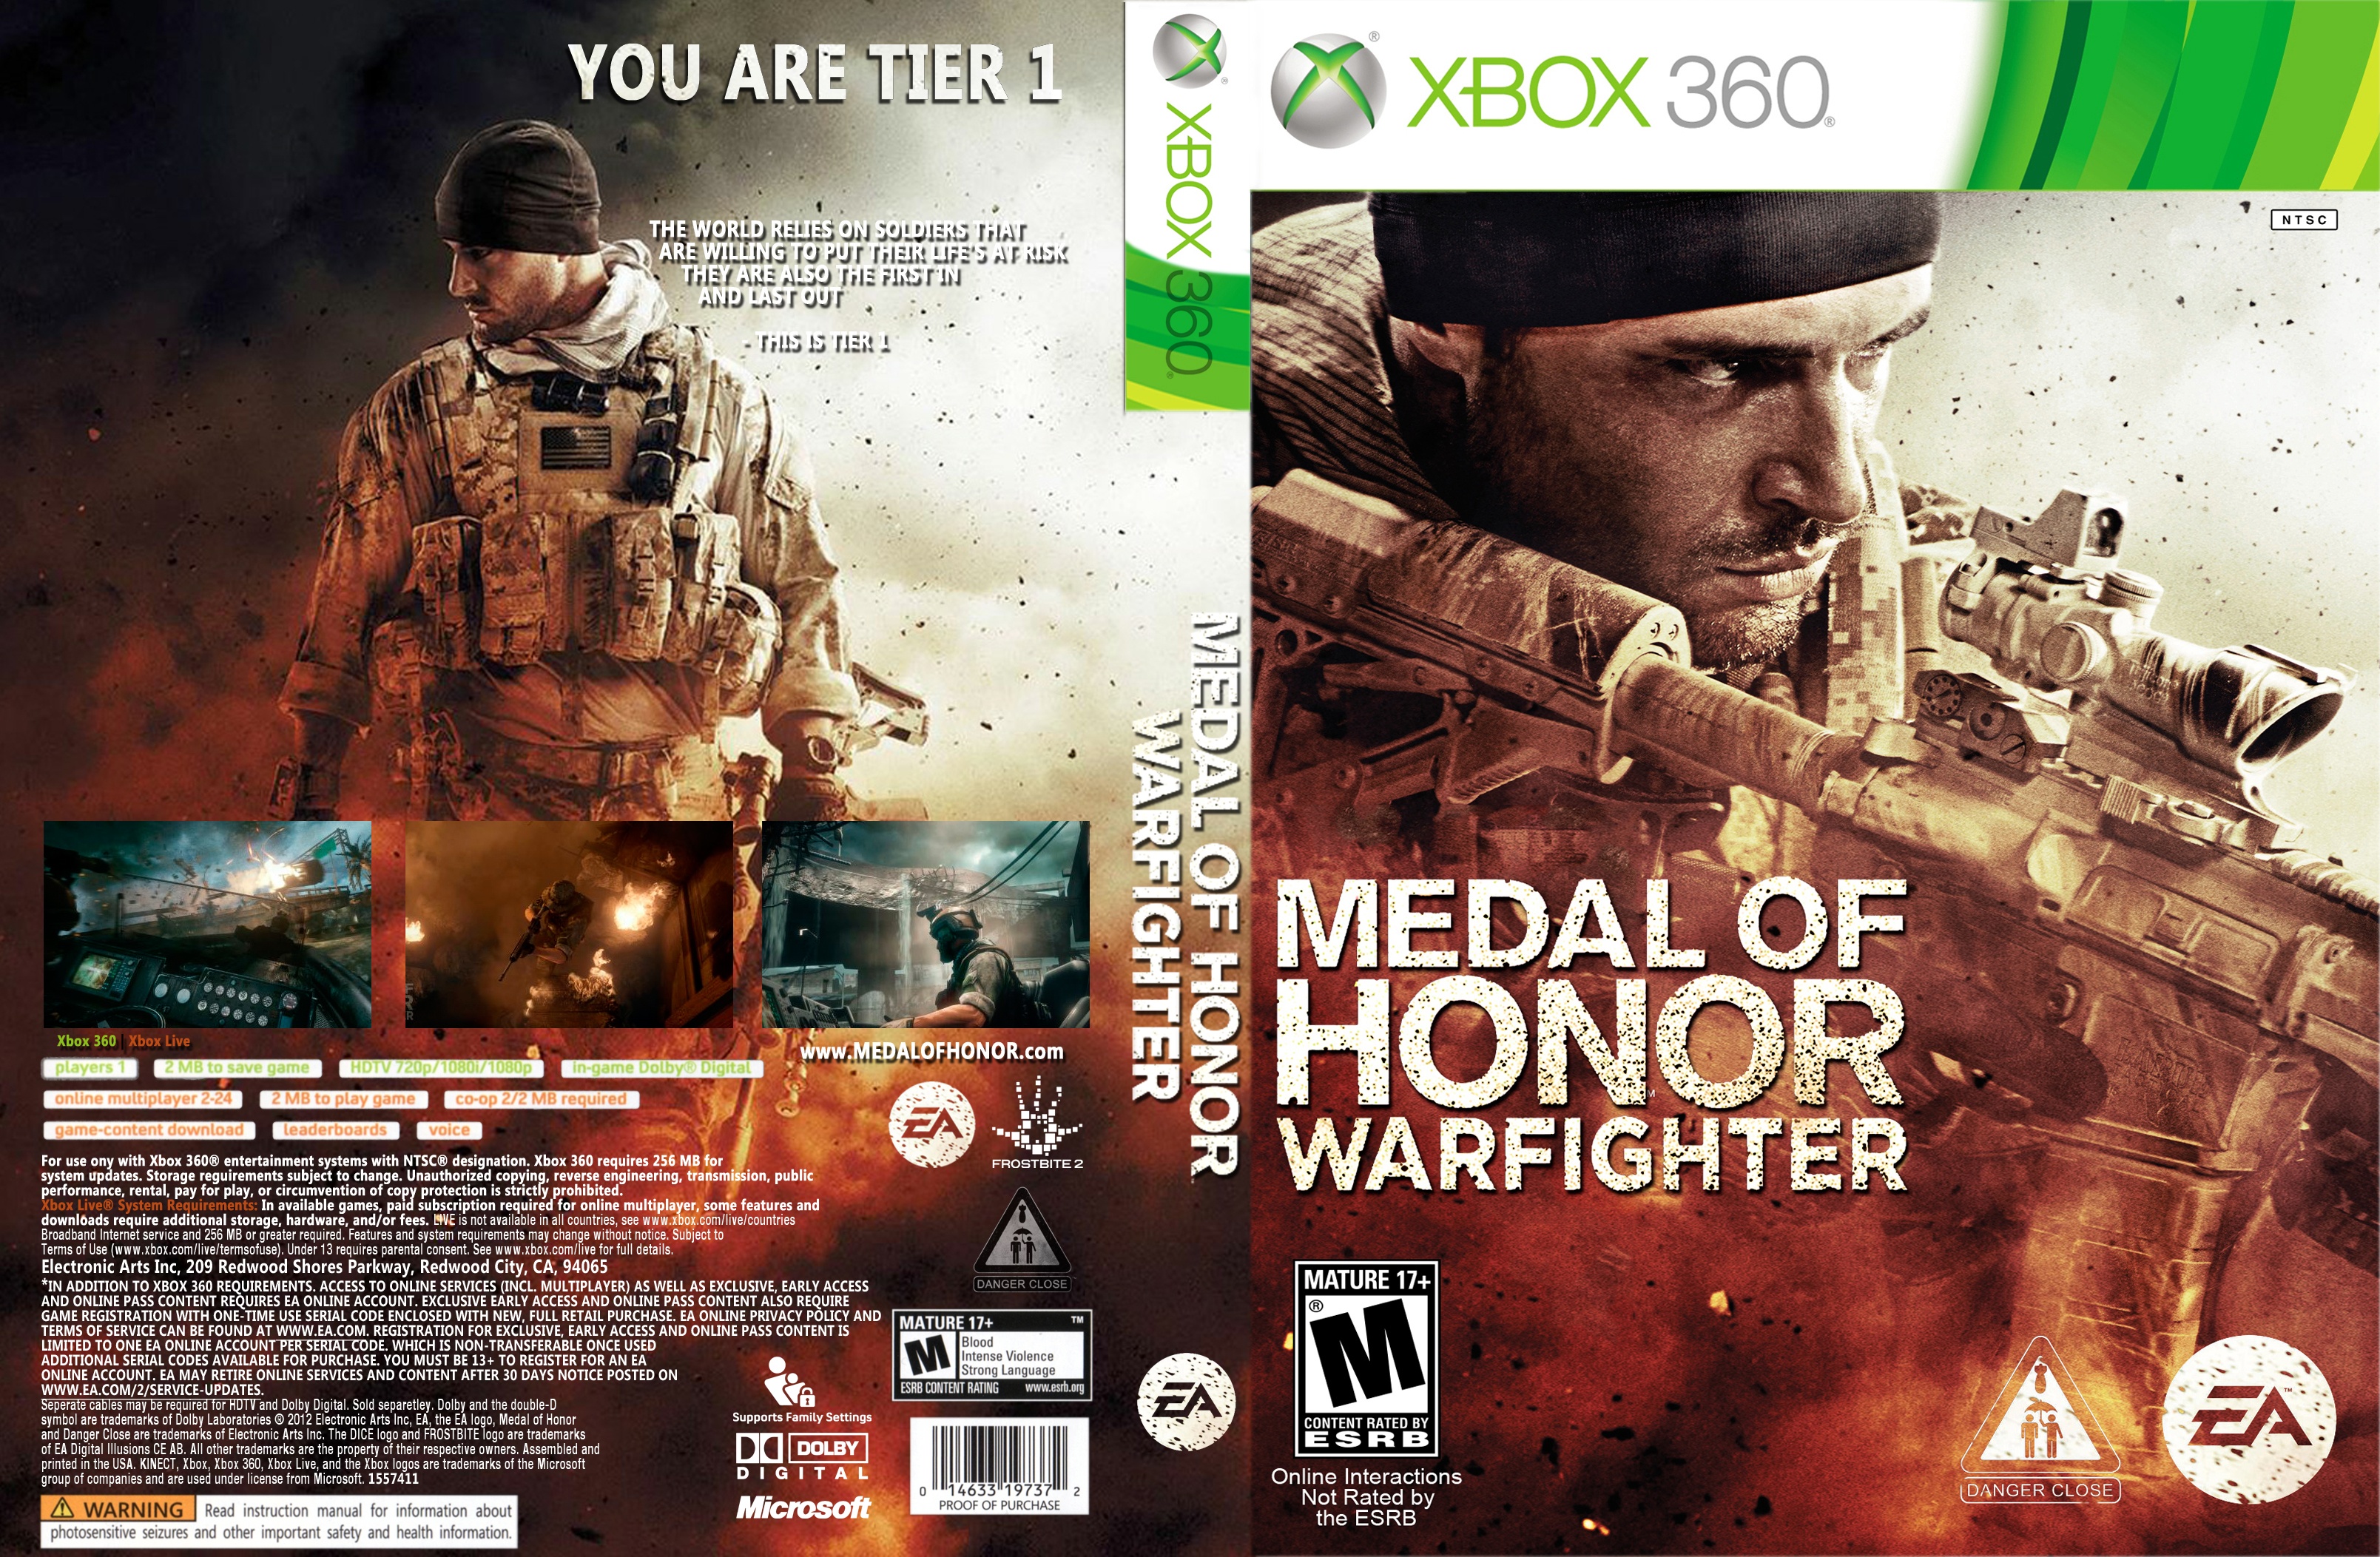 Medal of honor 360. Medal of Honor Warfighter Xbox 360. Medal of Honor Warfighter Xbox 360 Disk. Medal of Honor: Warfighter Xbox 360 обложка. Medal of Honor 2012.